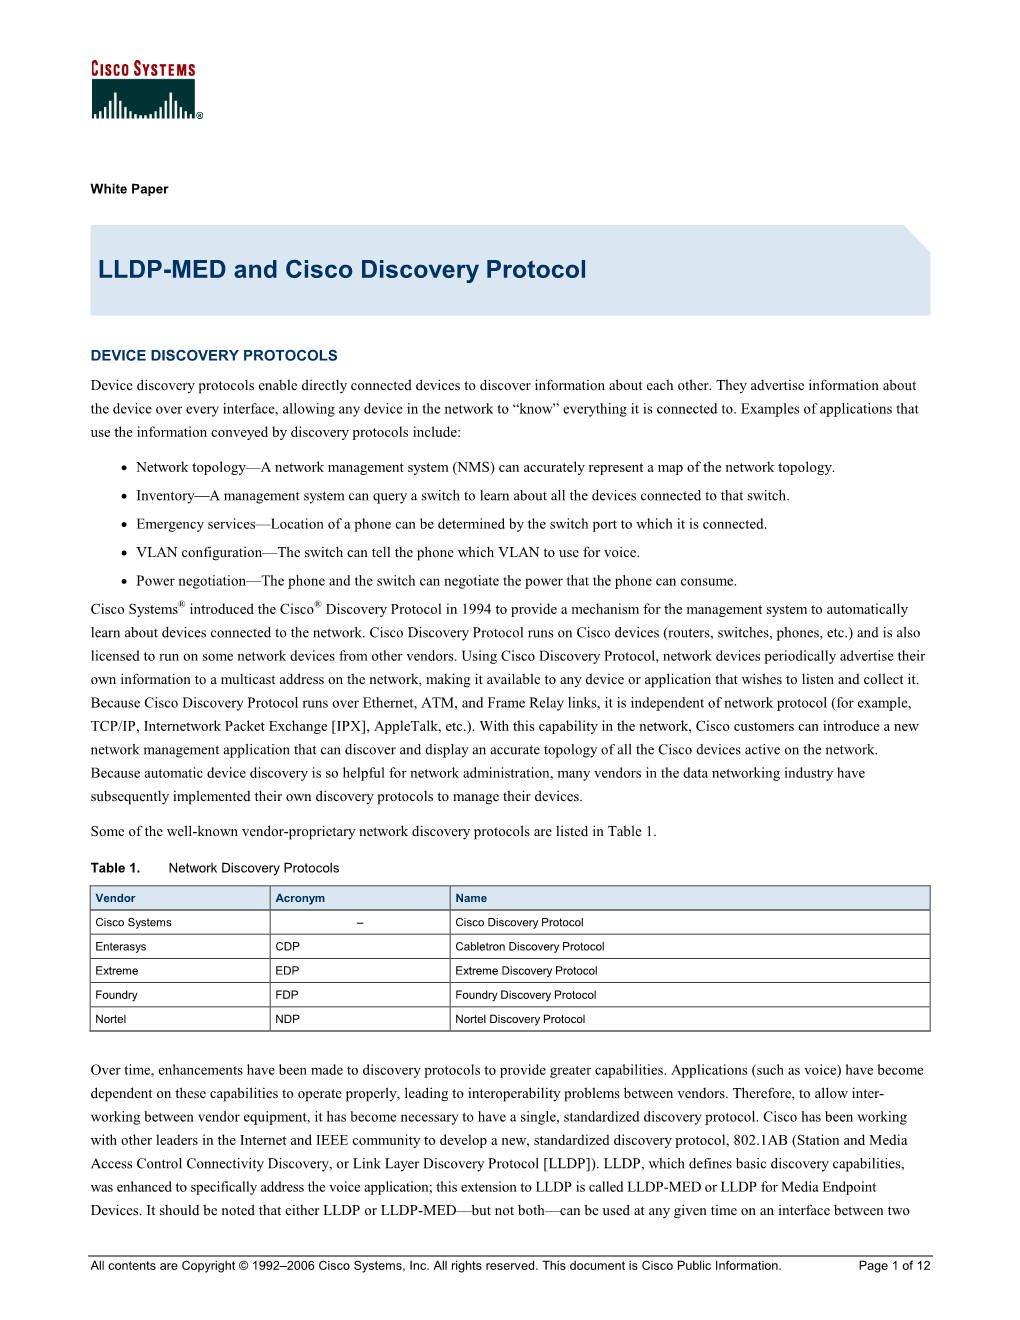 LLDP-MED and Cisco Discovery Protocol